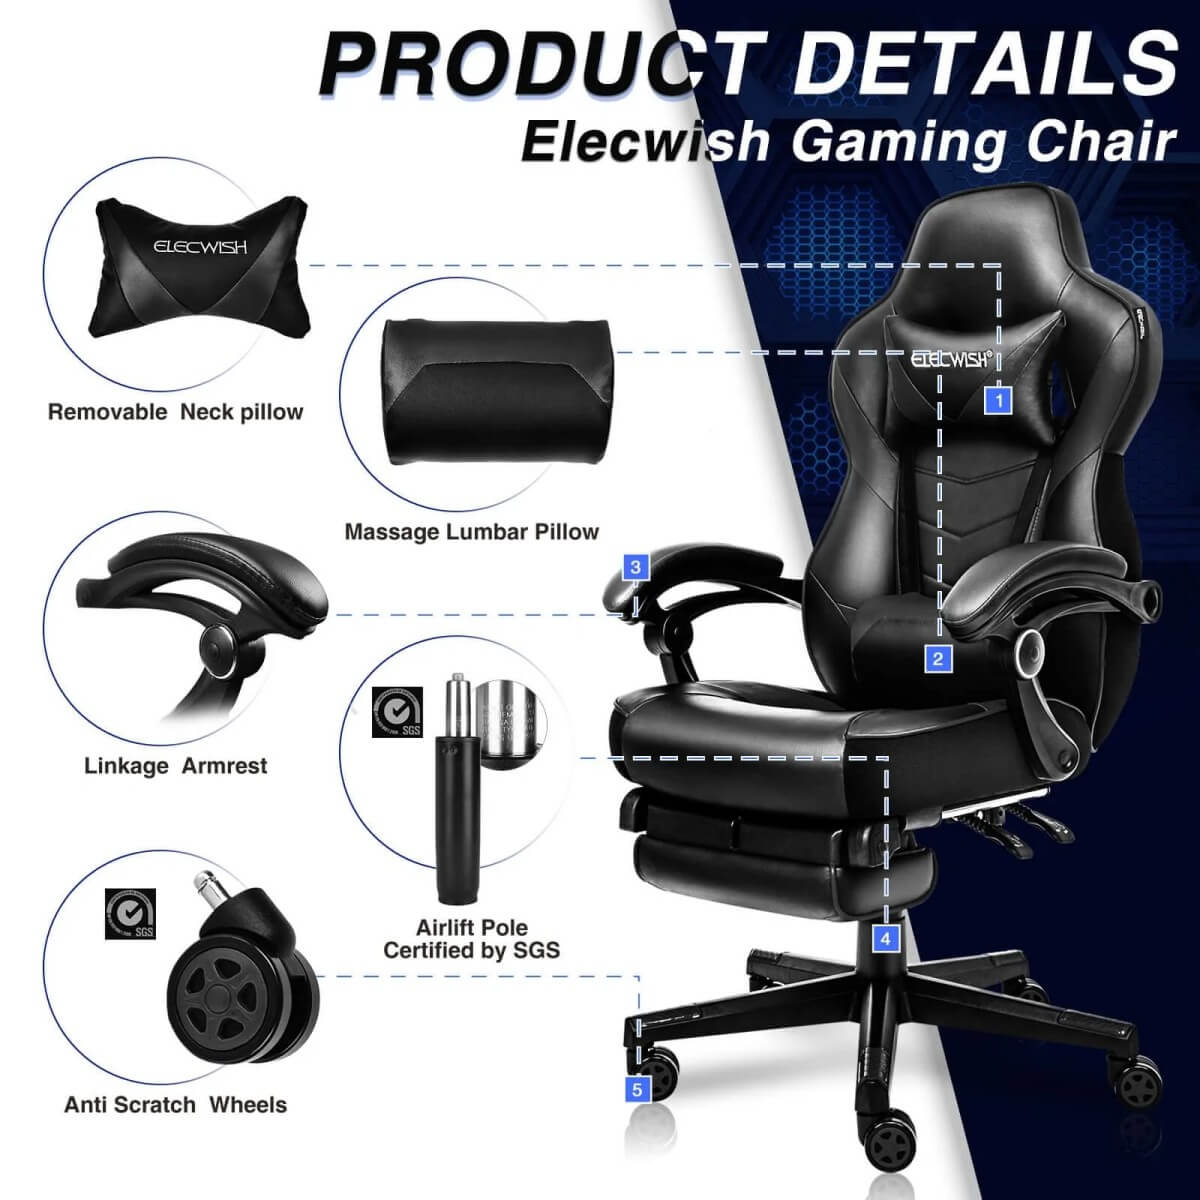 Elecwish Video Game Chairs Gray Gaming Chair With Footrest OC087 details